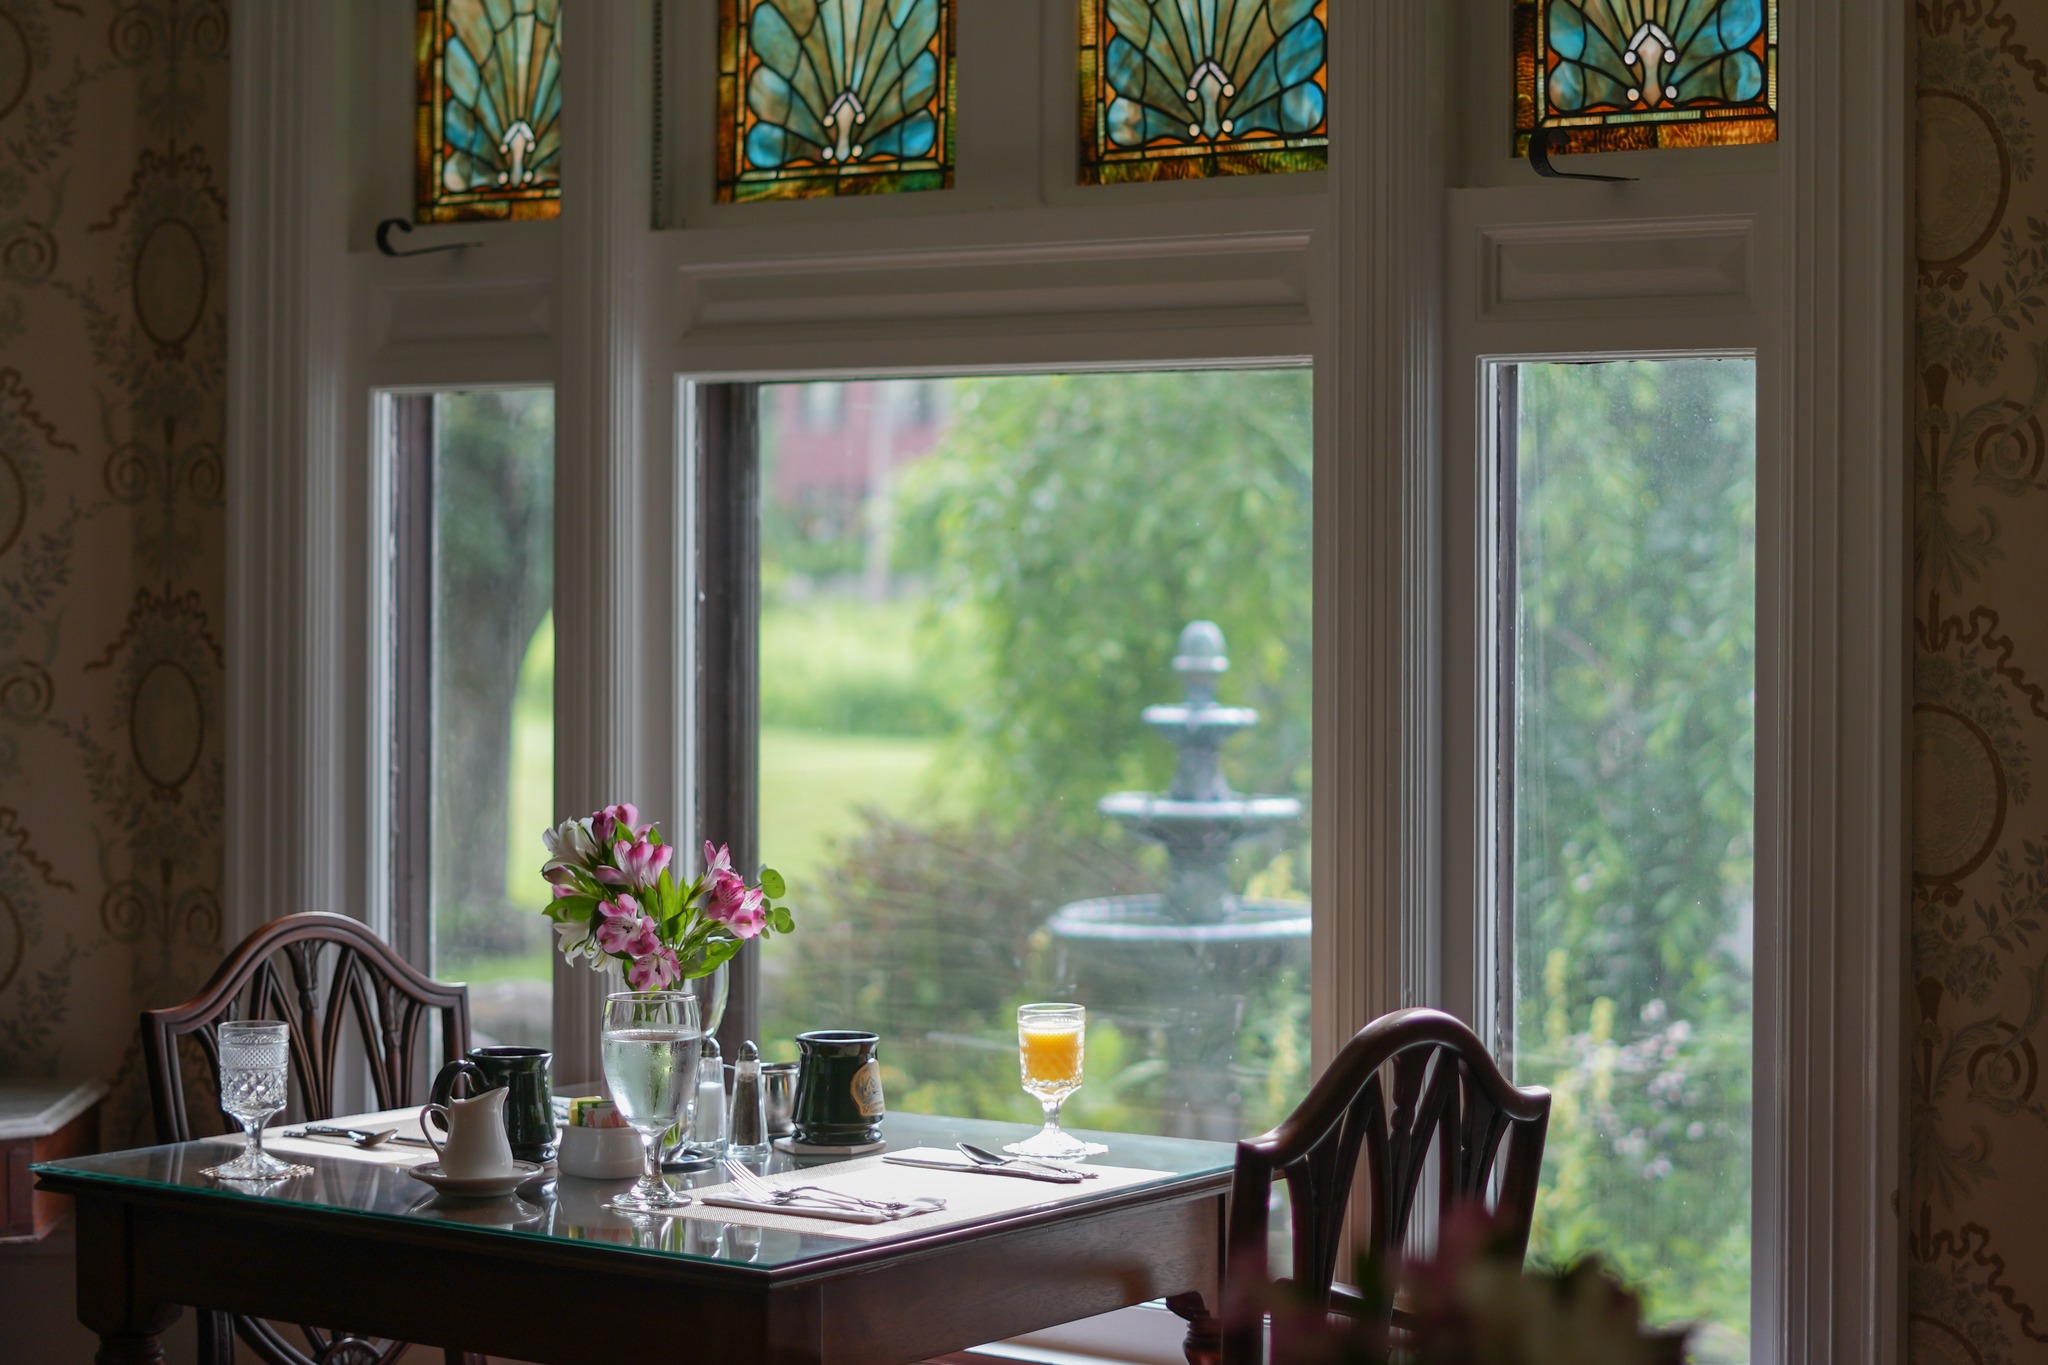 Sustainable Luxury Travel at the Manor House Inn, Norfolk, CT